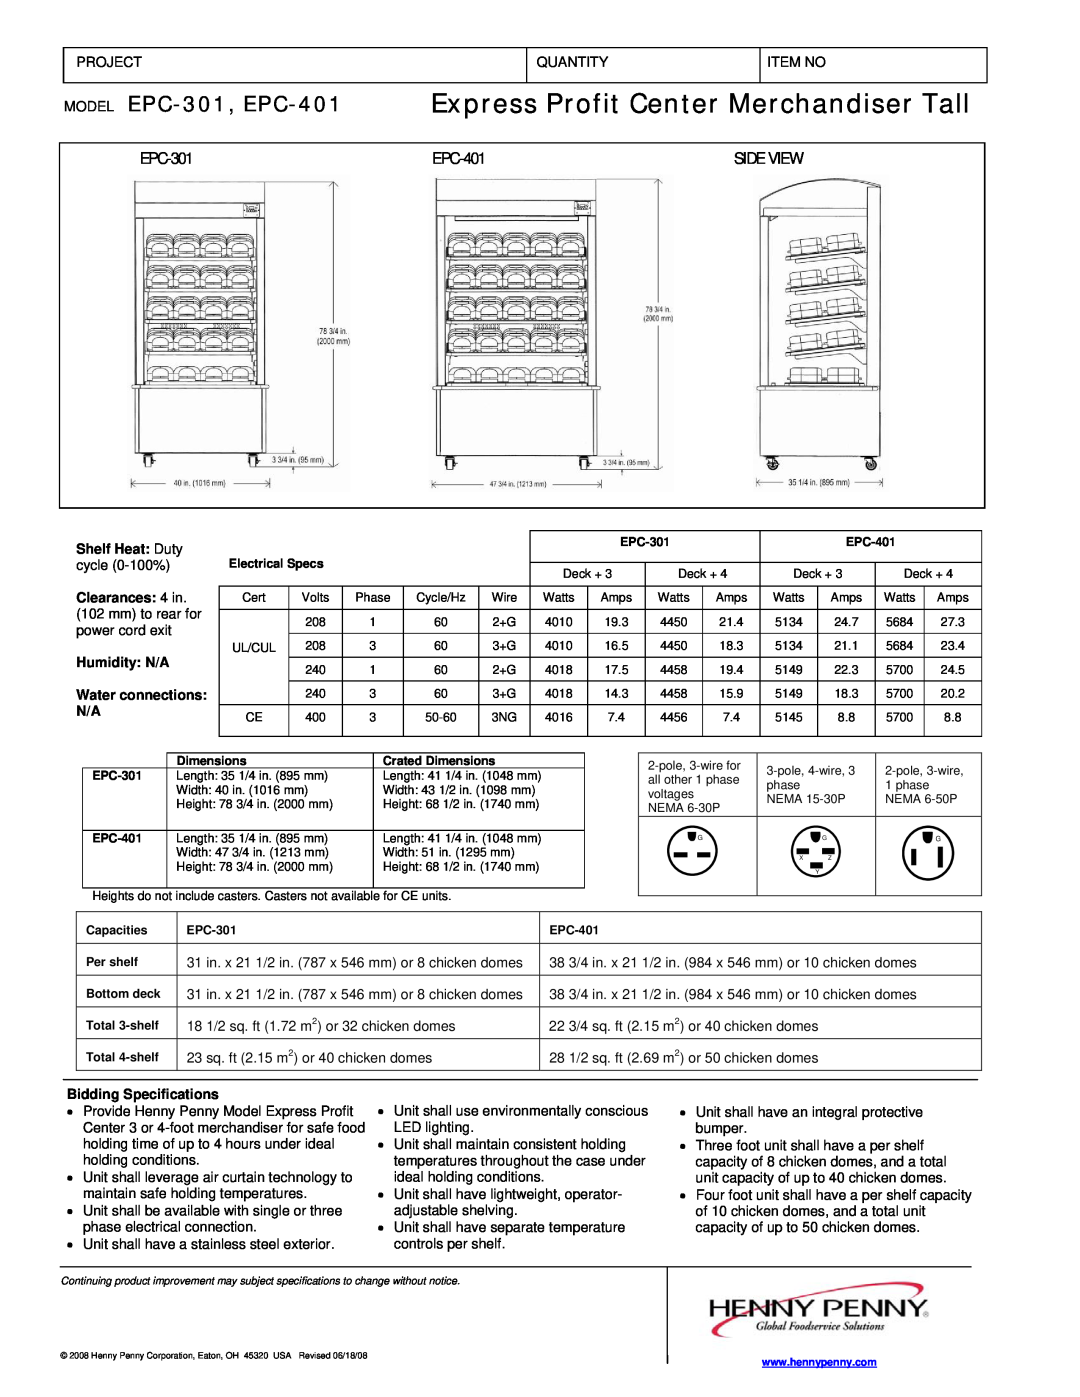 Henny Penny EPC-401 manual EPC-301, Side View, Humidity N/A Water connections N/A, Bidding Specifications 